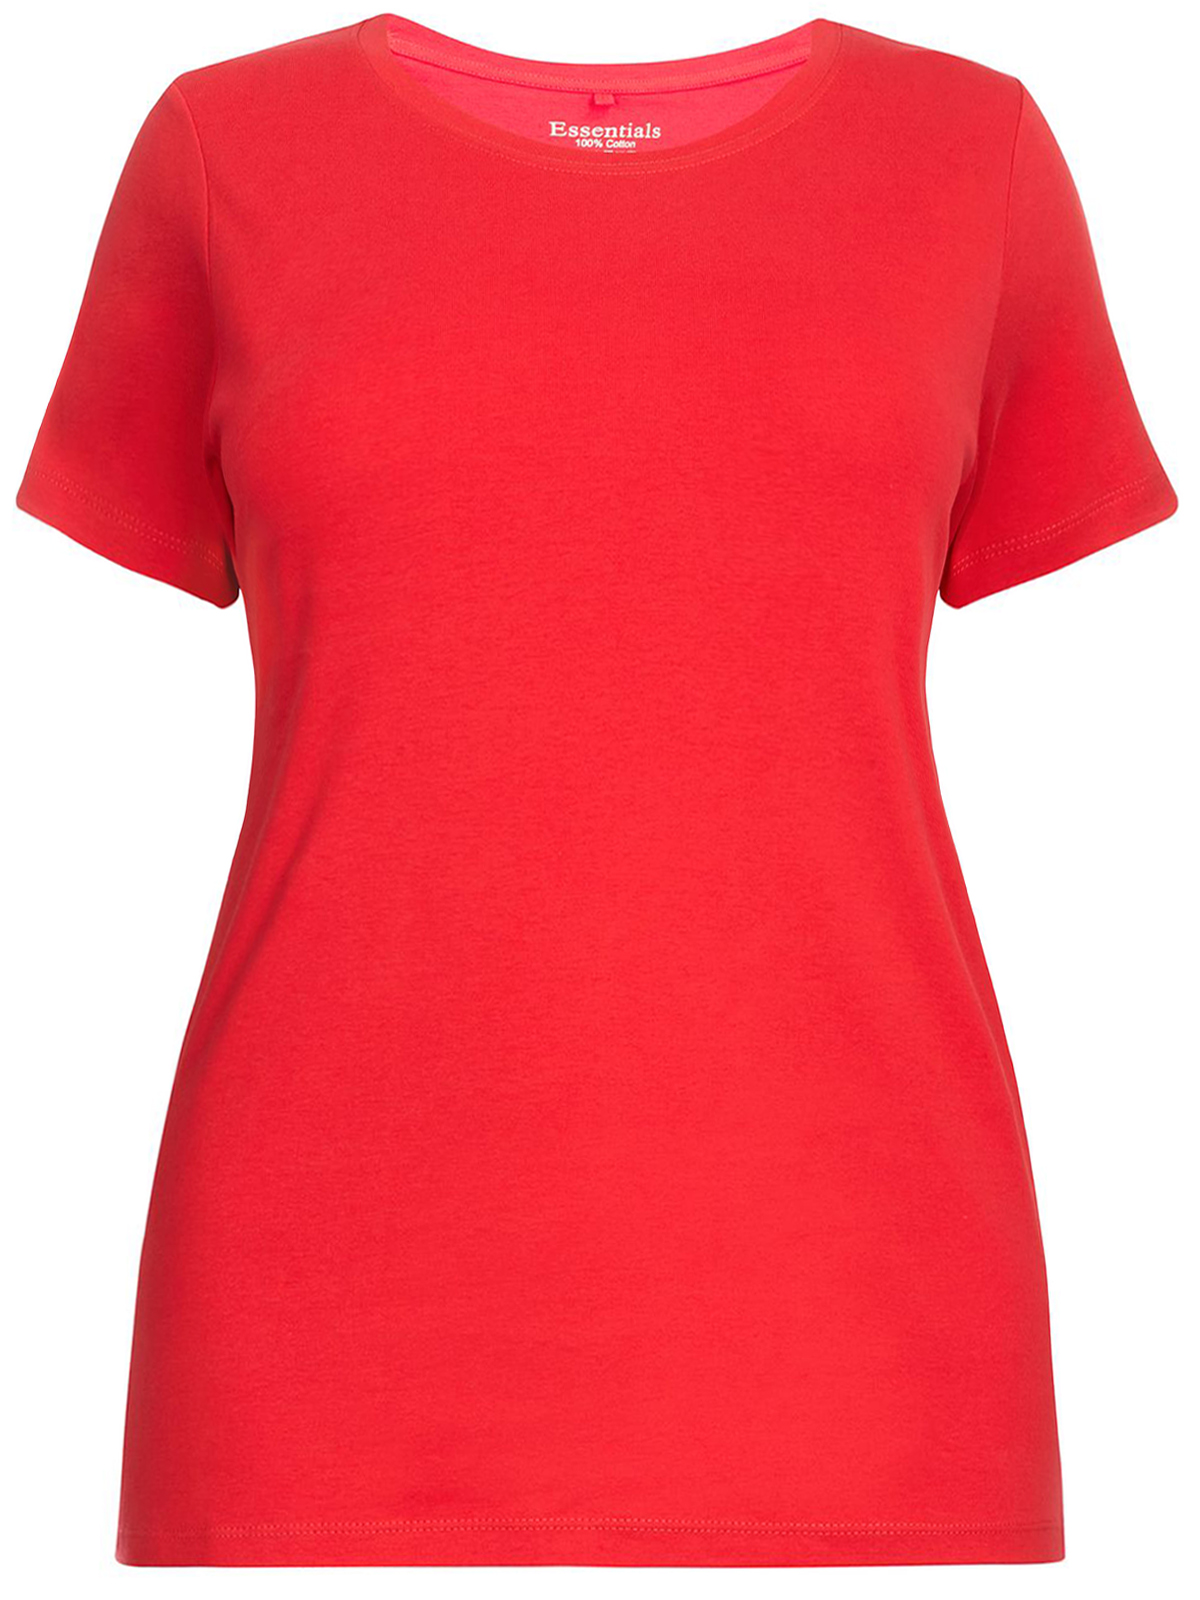 3vans RED Crew Neck T-Shirt - Plus Size 20 to 26/28